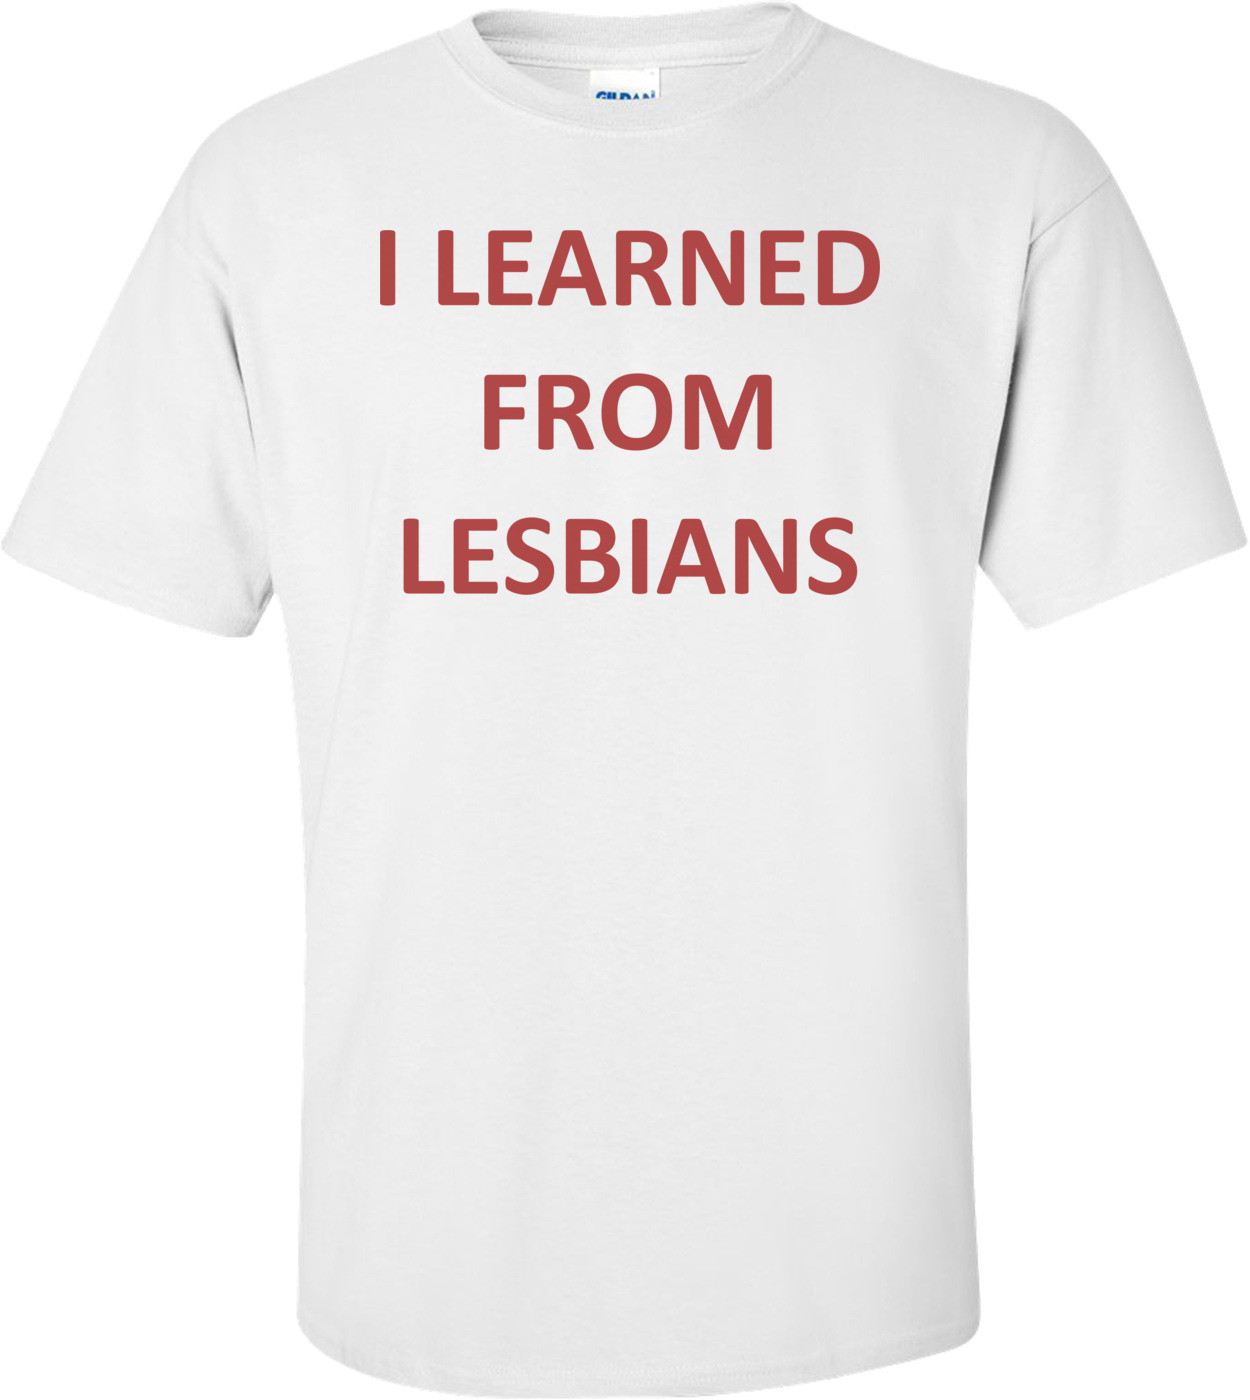 I LEARNED FROM LESBIANS